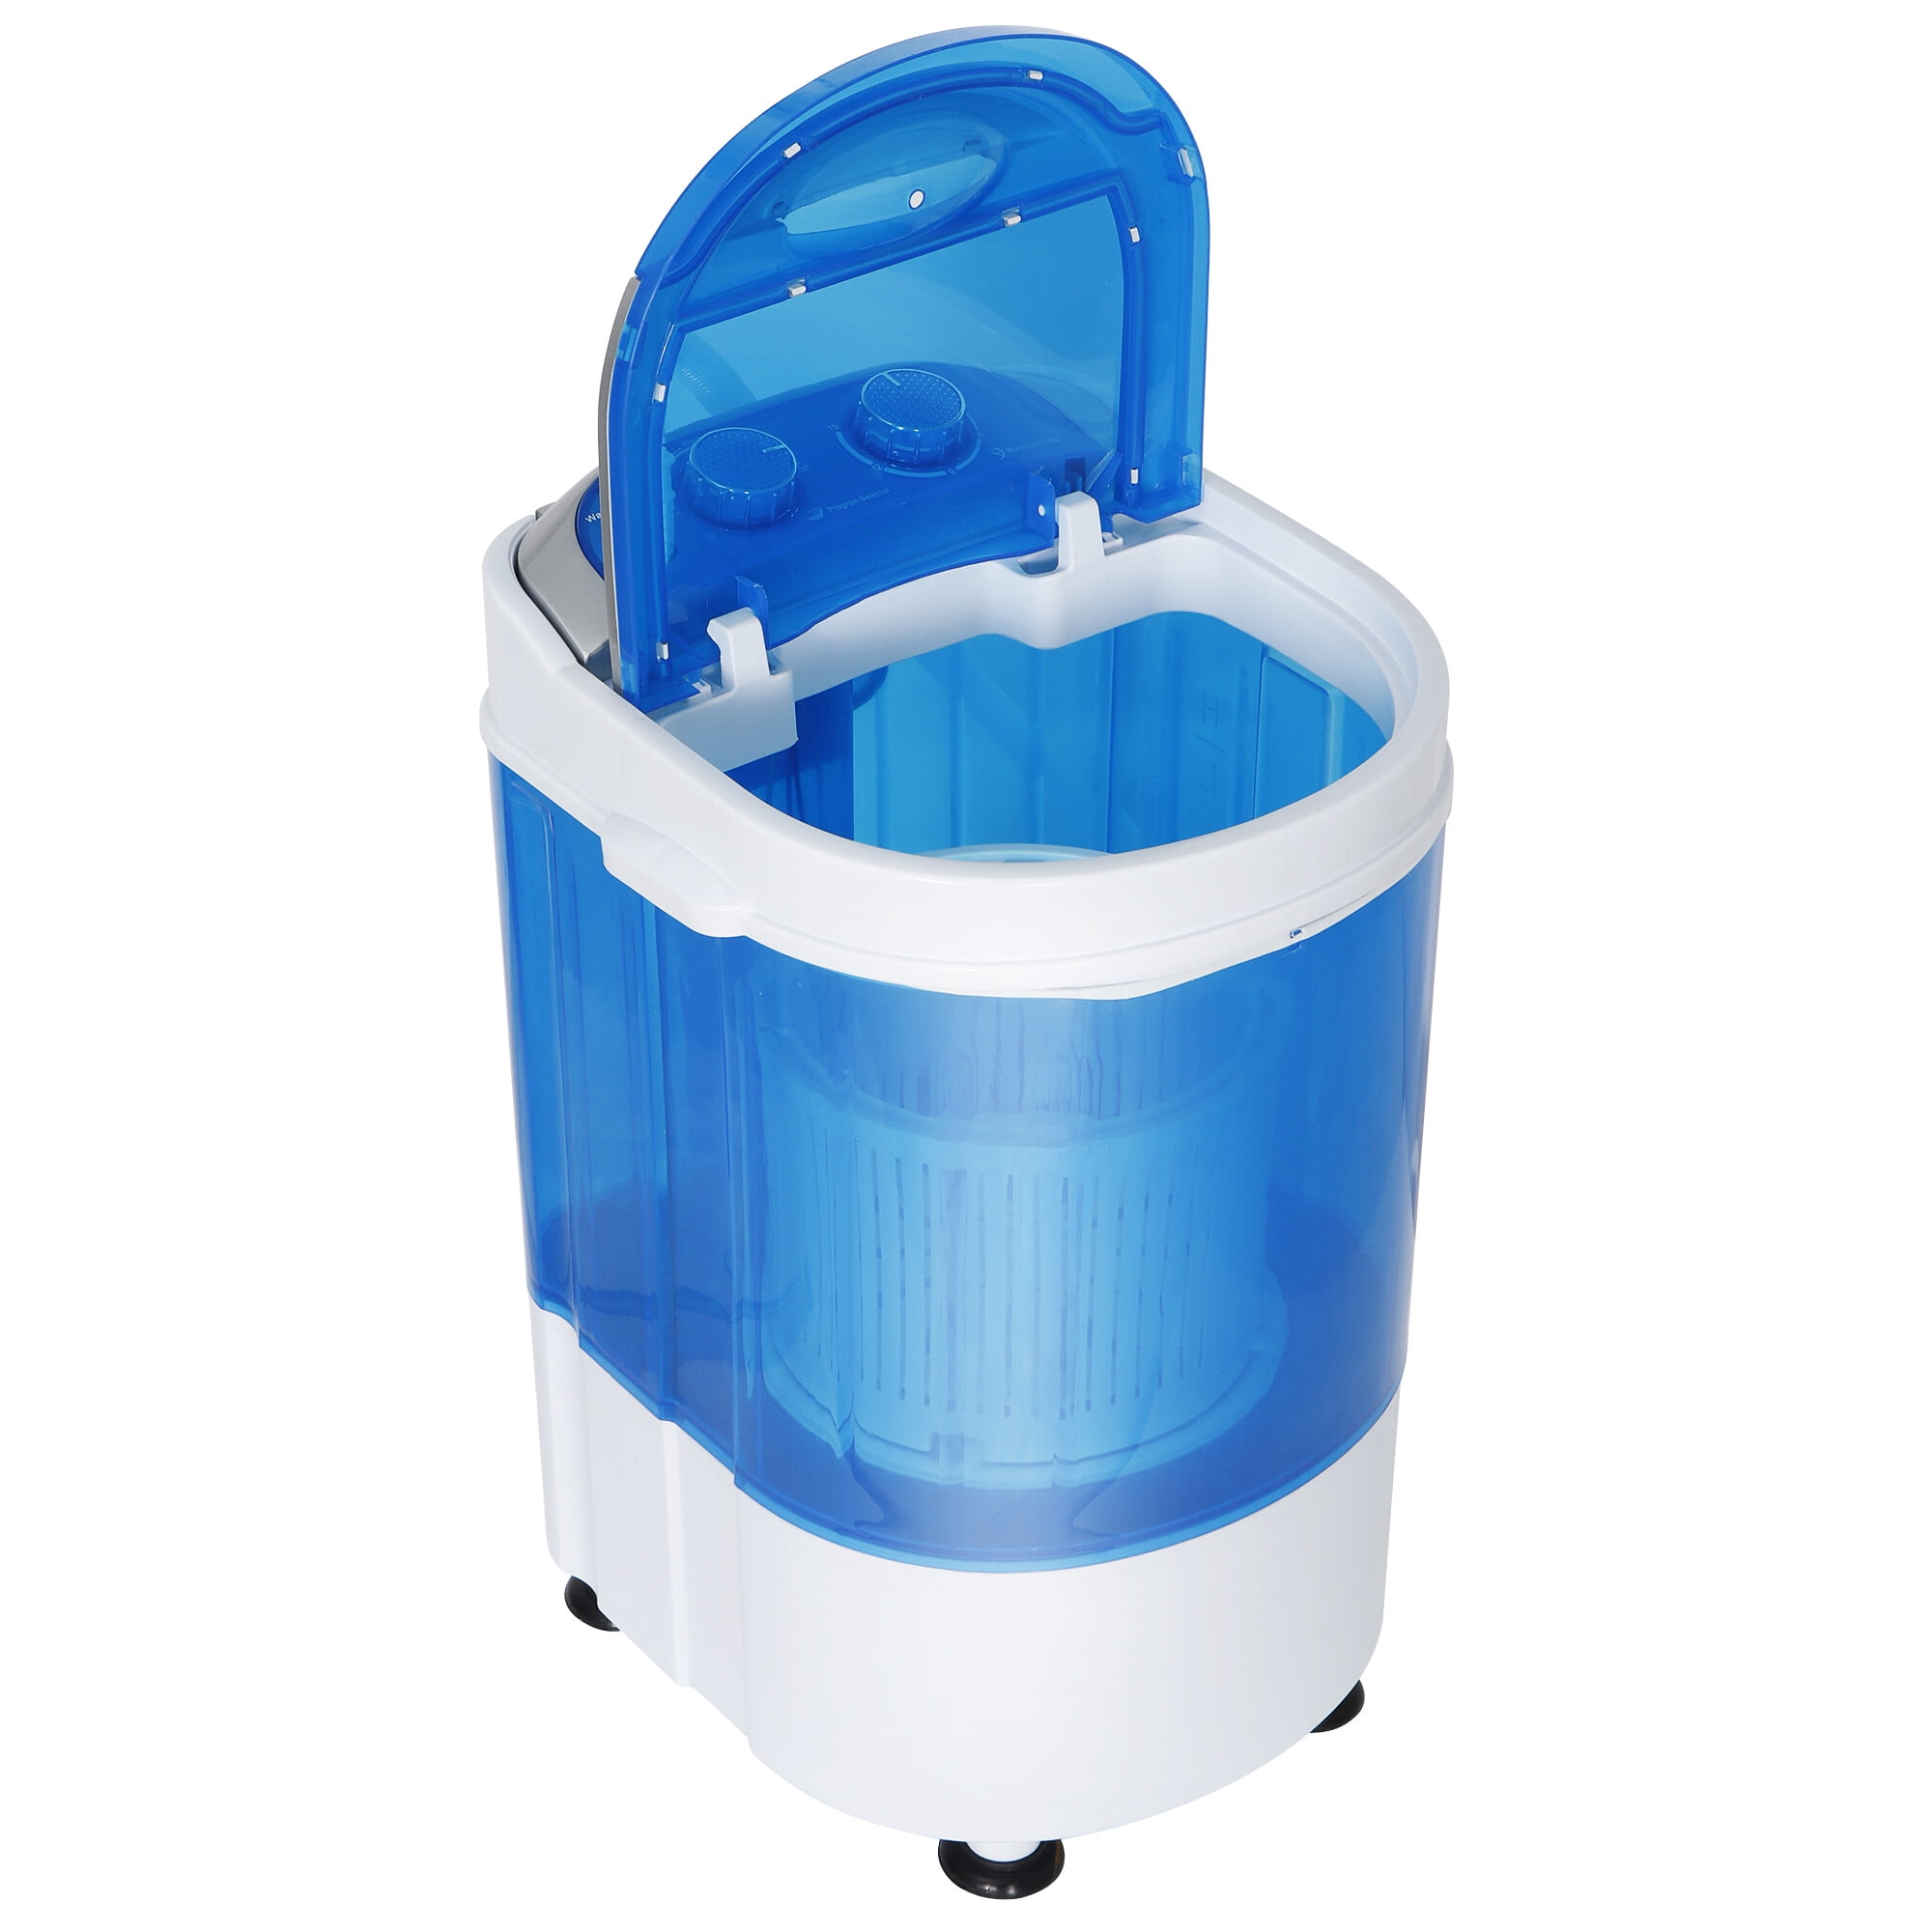 HomGarden 6.6lbs Capacity Portable Mini Washing Machine, Top-Load Washer  Spin Cycle Basket, Blue